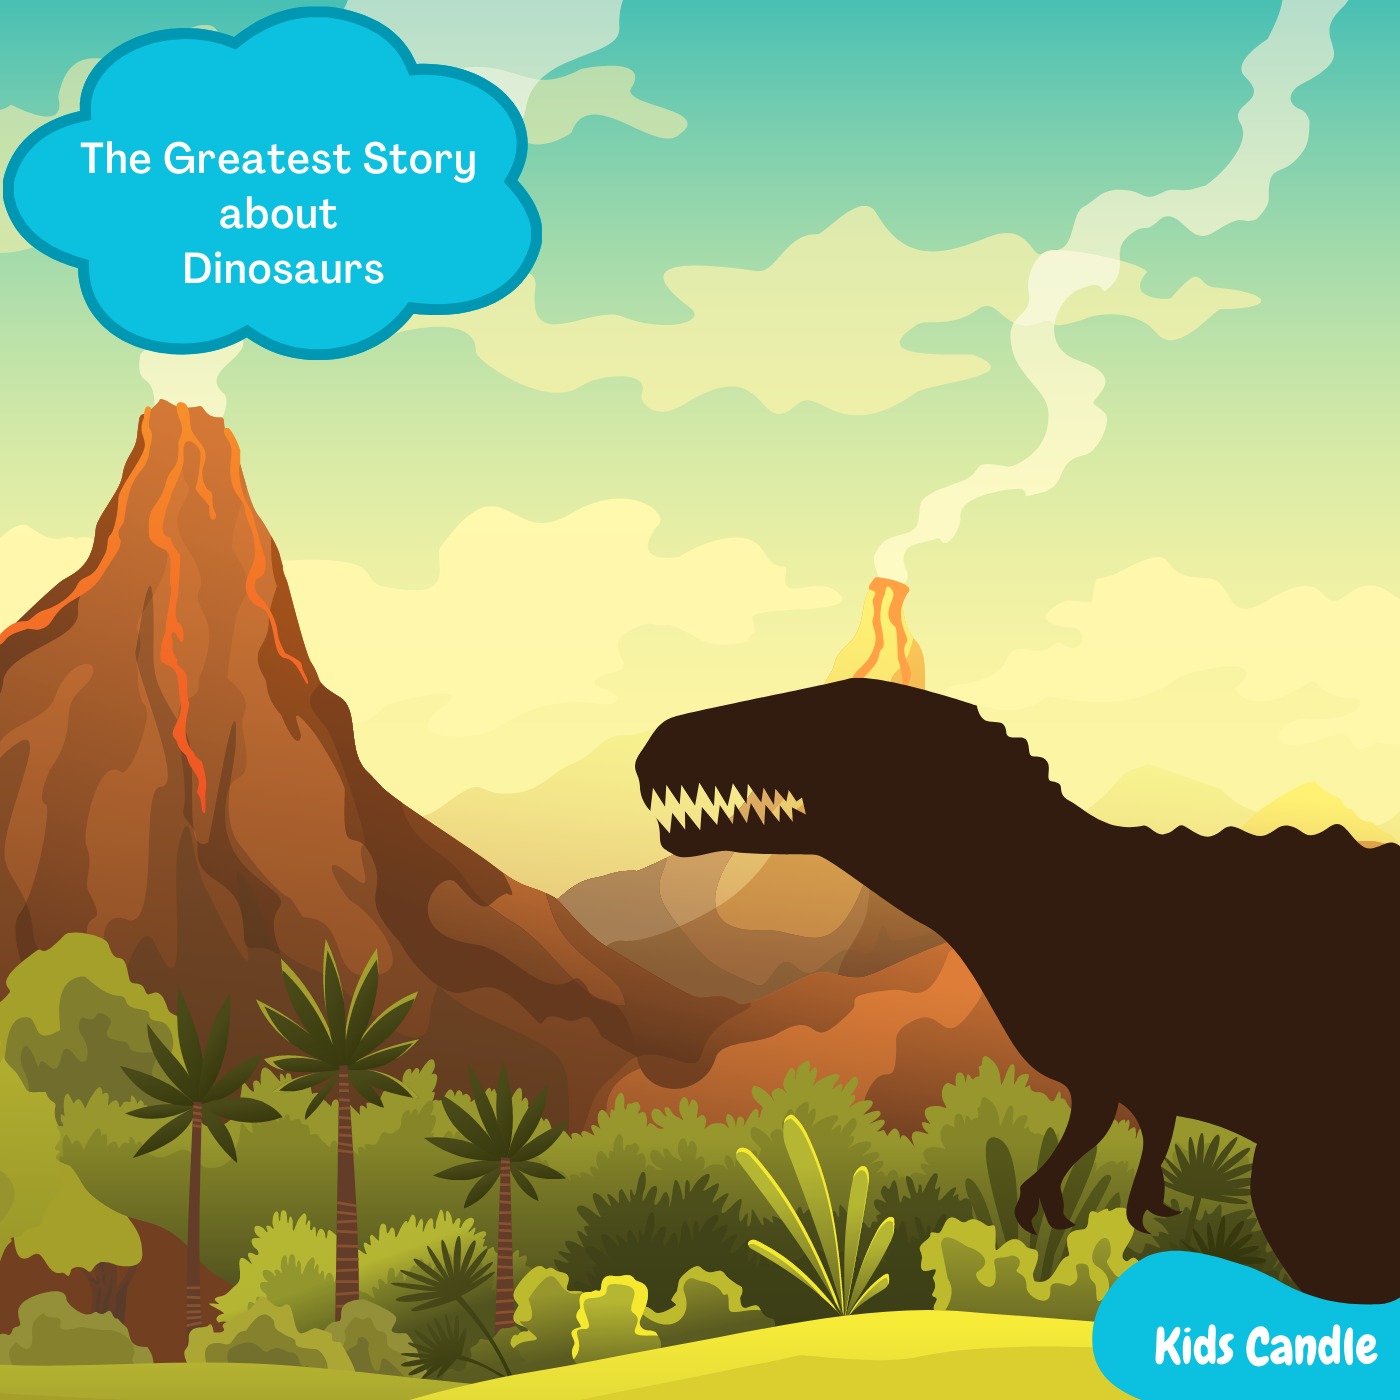 The Greatest Story about Dinosaurs